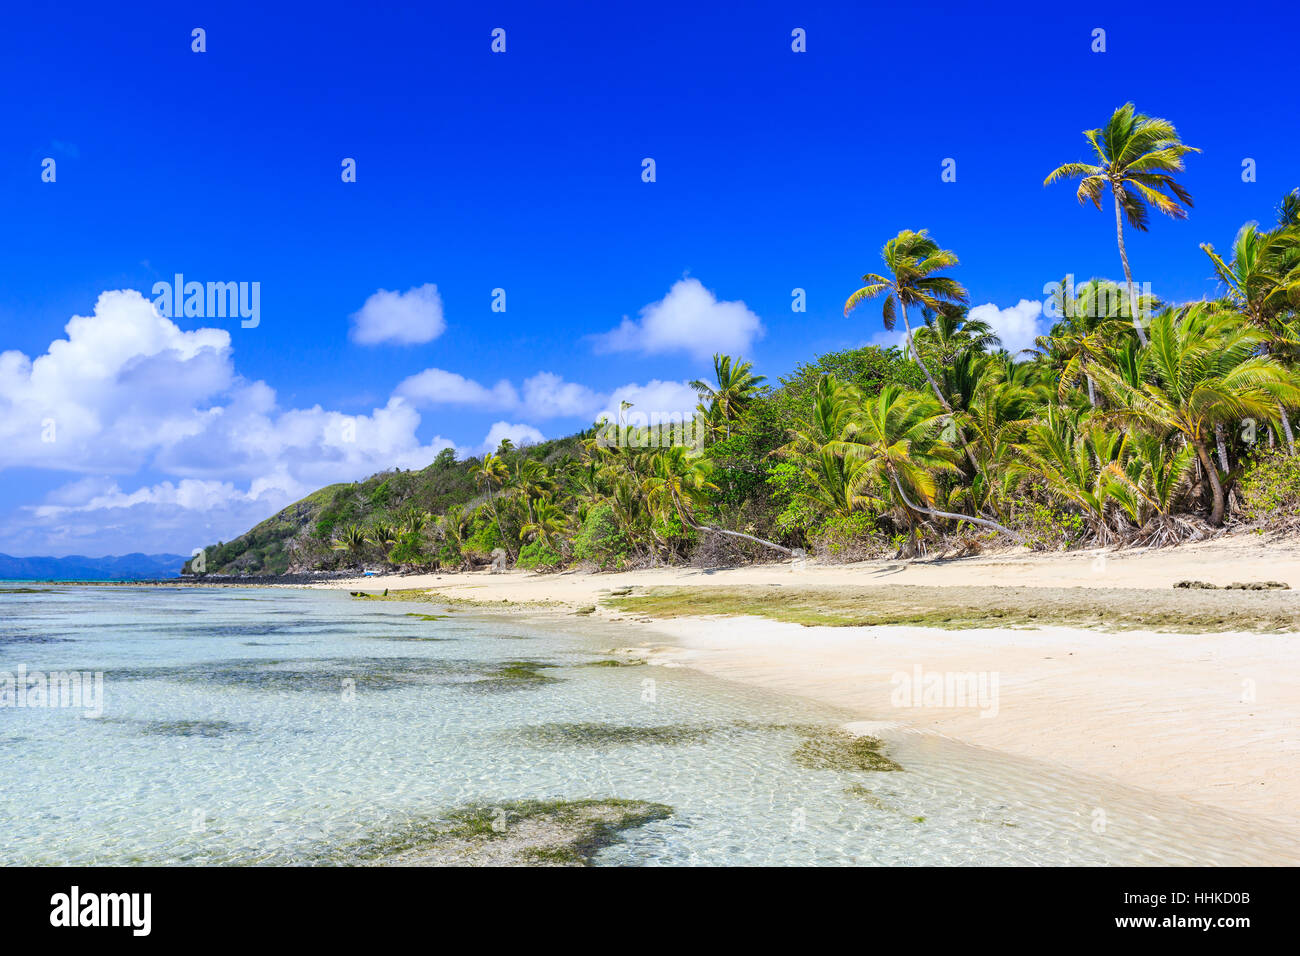 Dravuni Island, Fiji. Beach and palm trees in the South Pacific ocean. Stock Photo